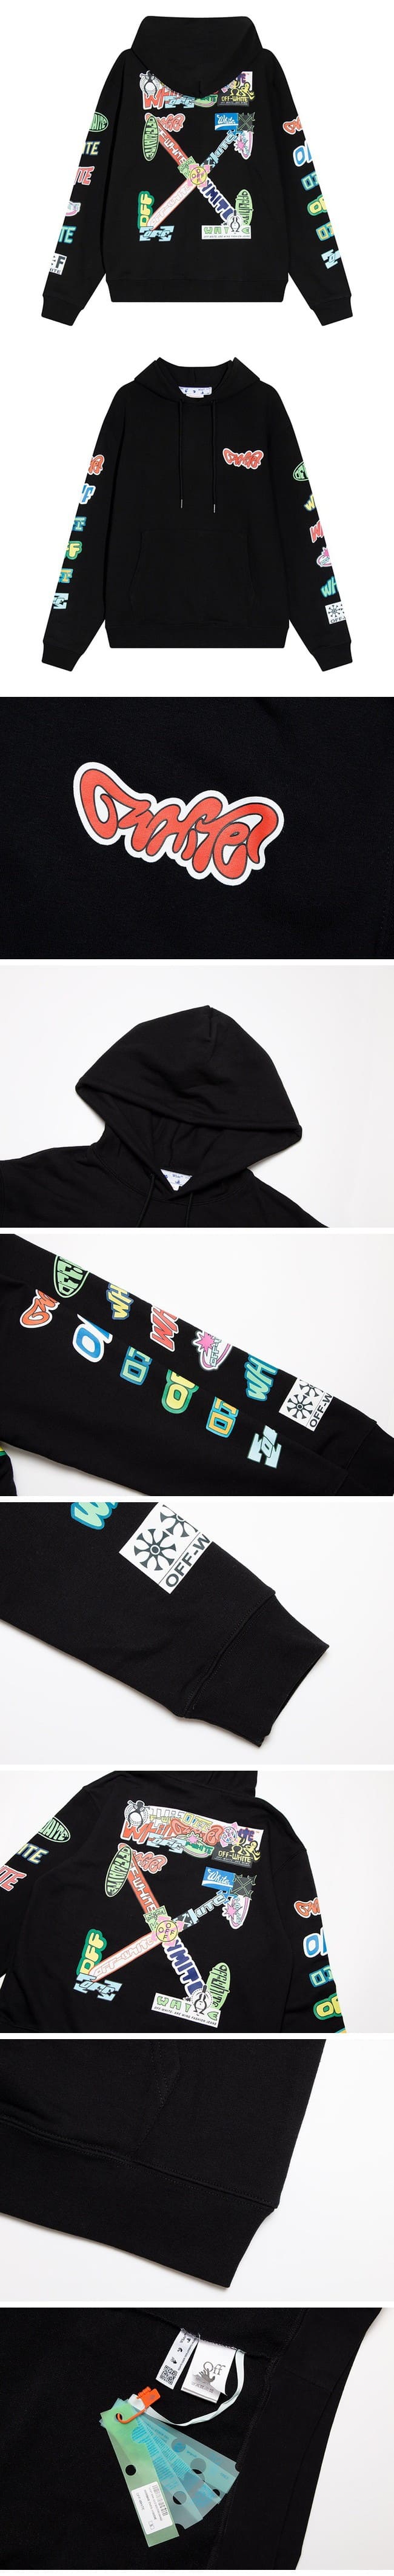 Off-White 22FW Graphic-print Hoodie オフホワイト グラフィックプリント パーカー